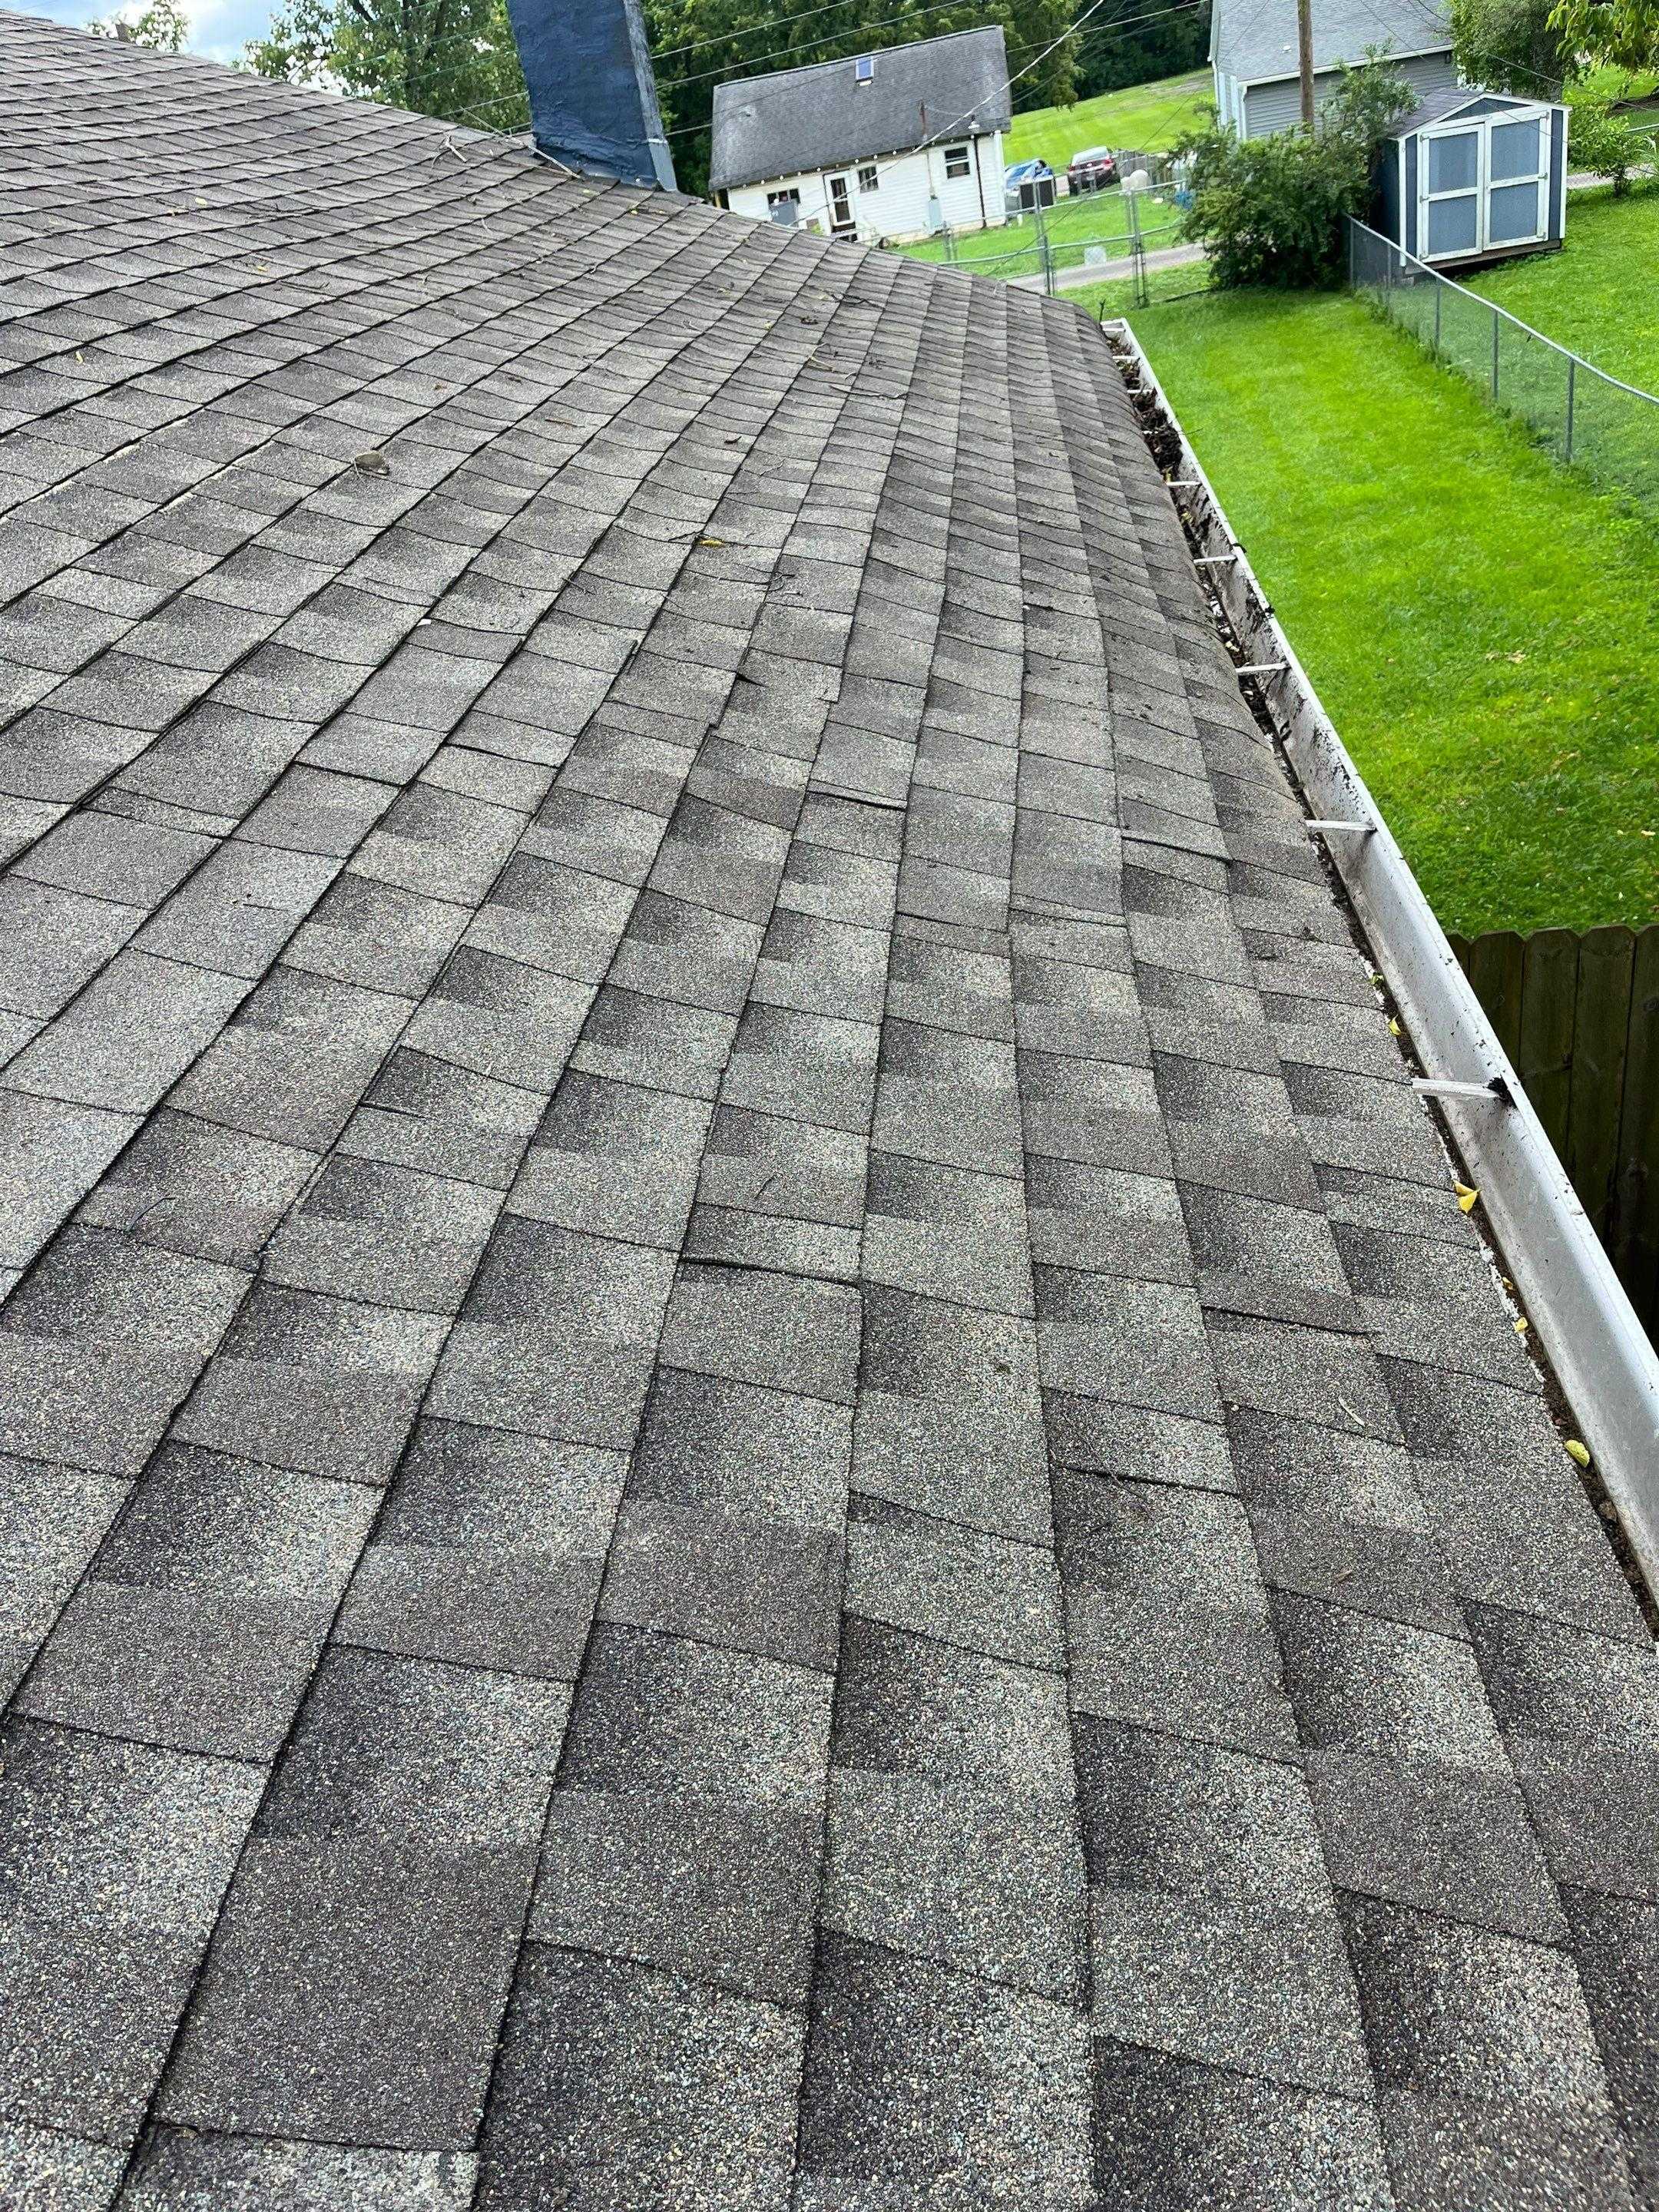 Best matched color shingles added over area.